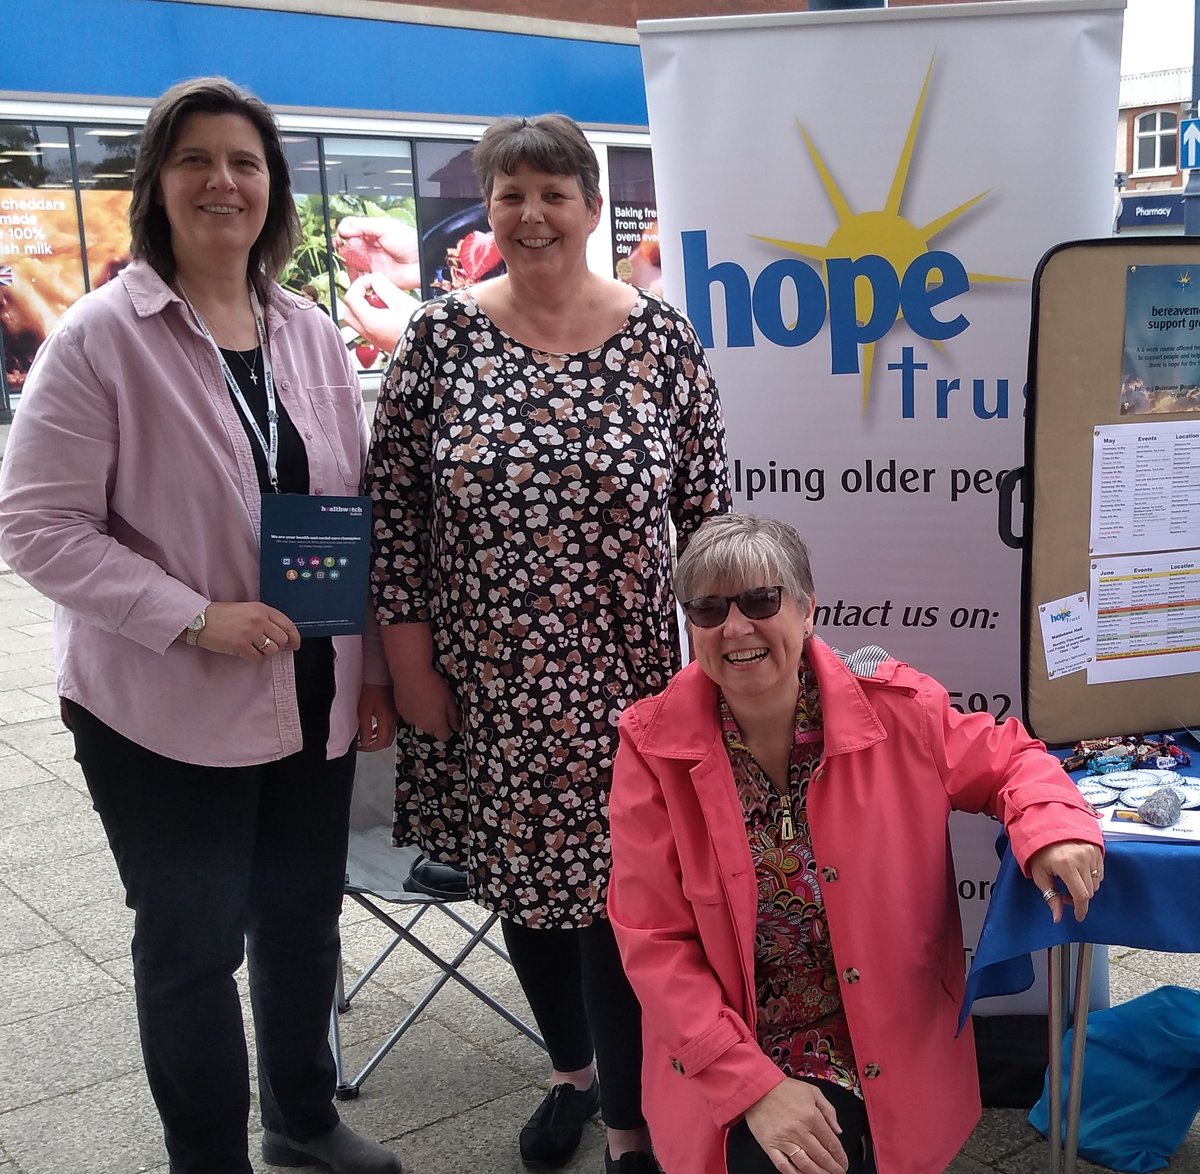 We were thrilled to have participated in Felixstowe's Dementia Awareness Day last weekend alongside fellow organisations like the Hope Trust! Connecting with attendees, providing them with valuable support resources, and learning from their experiences was a privilege.